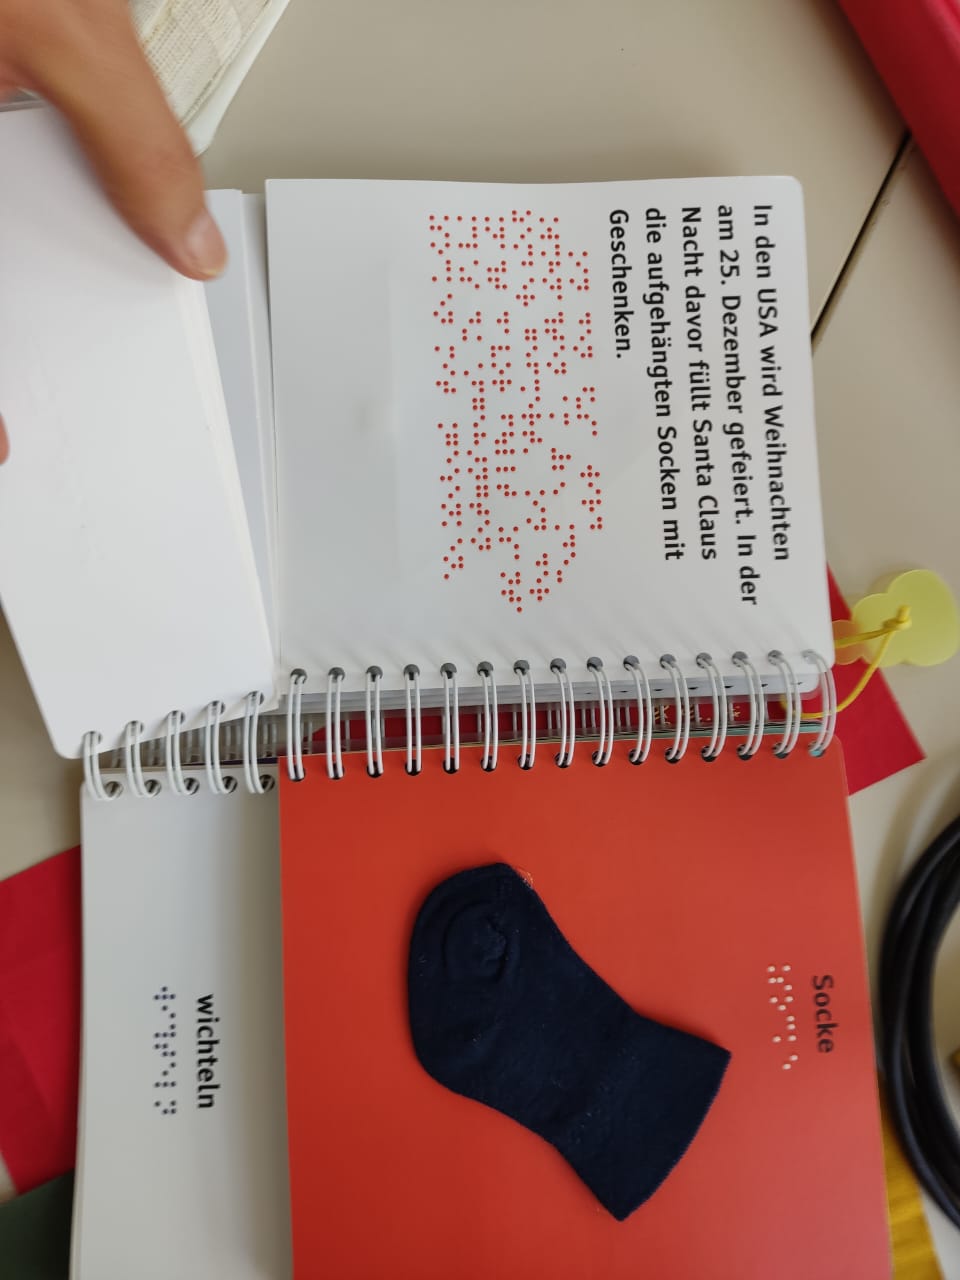 Learning book in Braille language at Leipzig German